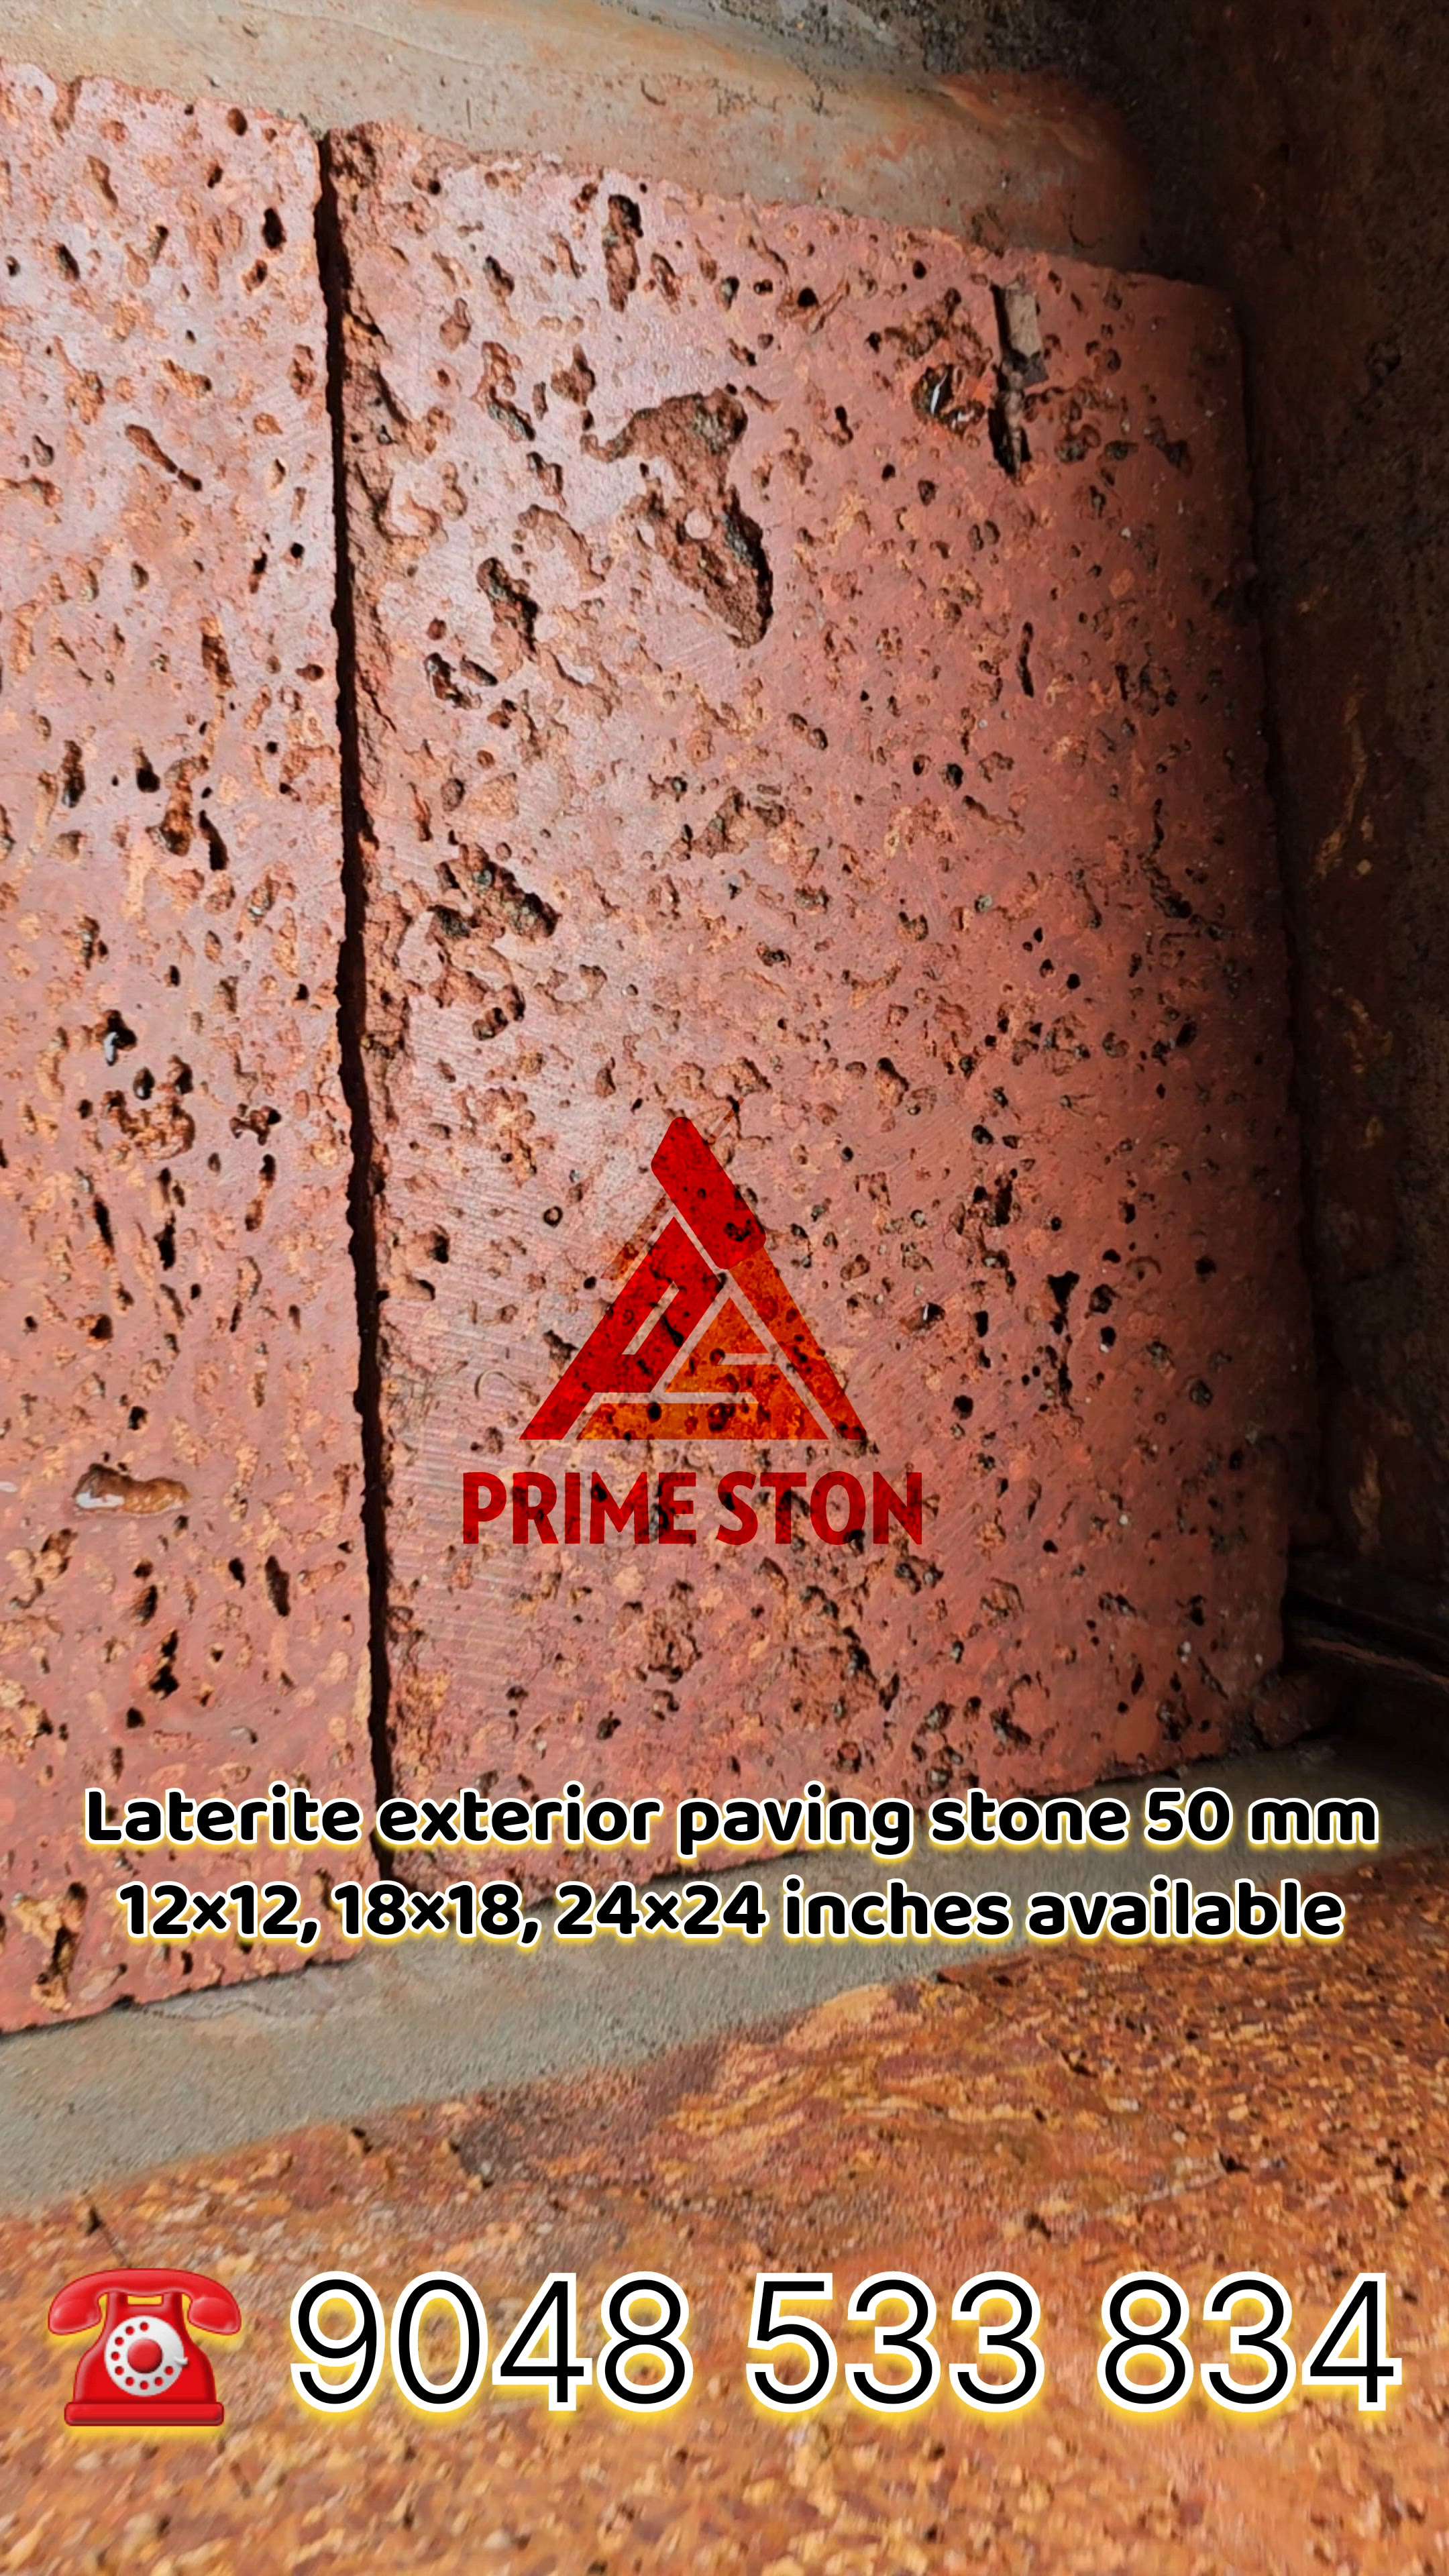 PRIME STON❤️ Laterite Cladding Tiles# Laterite Flooring Slabs# Laterite Paving Stones, Laterite Furniture's, Laterite Monuments, Laterite Single Pillars ...
💚100% Natural Laterite Stone Products Manufacturer and laying contractor 💚
Our Service Available Allover India

Available Sizes....
12/6,12/7,15/9,18/9,21/9,24/9 inches 20 mm thickness...
Customized sizes also available...

Contact - 7306 706 542, 9188 007 961
 

primelaterite@gmail.com 
www.primestone.co. in
https://youtu.be/CtoUAPbgX08
 #pavingstones  #pavingblock  #paving  #natural_pavings  #stone_paving  #naturalstoneslabs  #new_work_finished